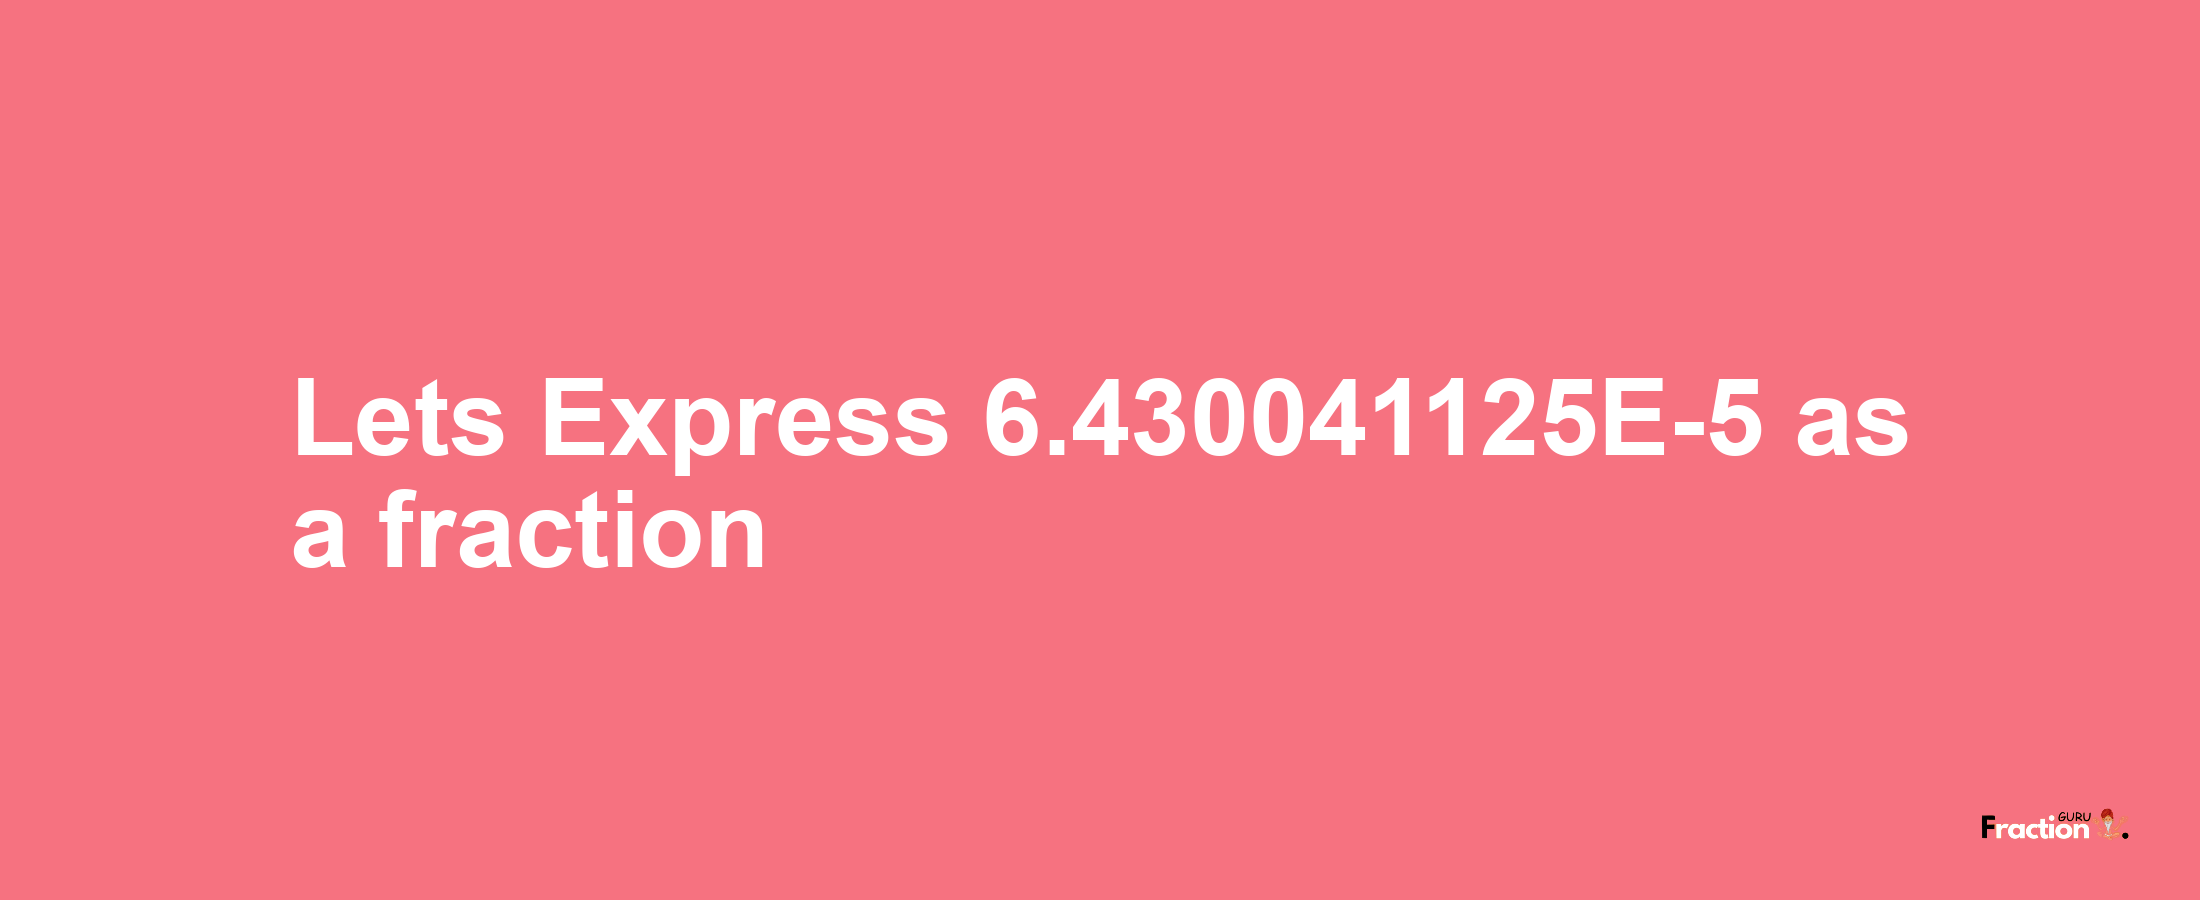 Lets Express 6.430041125E-5 as afraction